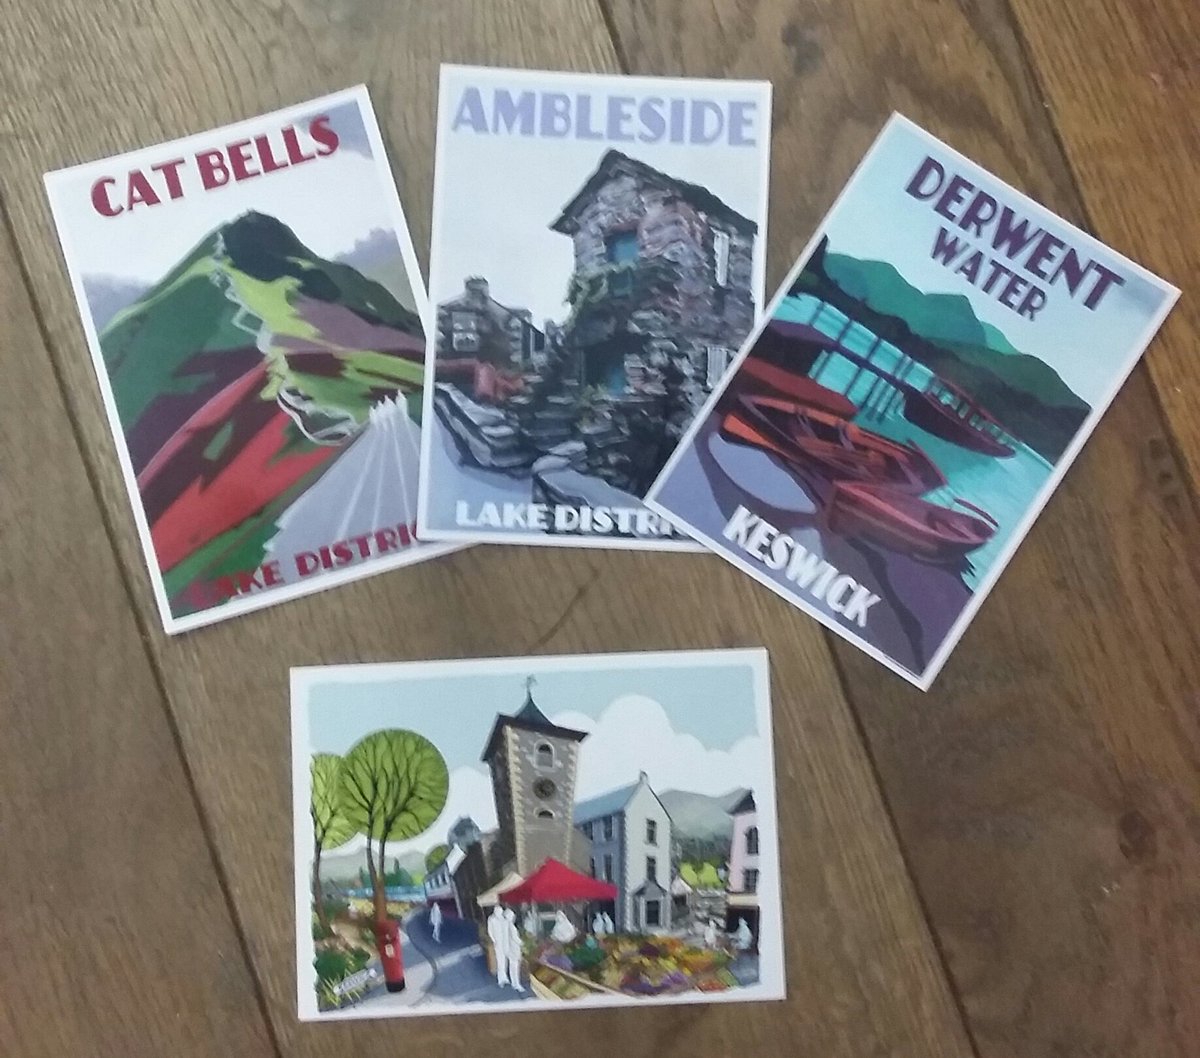 Flying out today these lovely postcards by @gm_sart and #jowitherington folks just can't resist. Thanks for #supporting our #talented #artists @FeatureCumbria @MadeCumbria @LiveShopLocal @LakesPound #cherrydidi